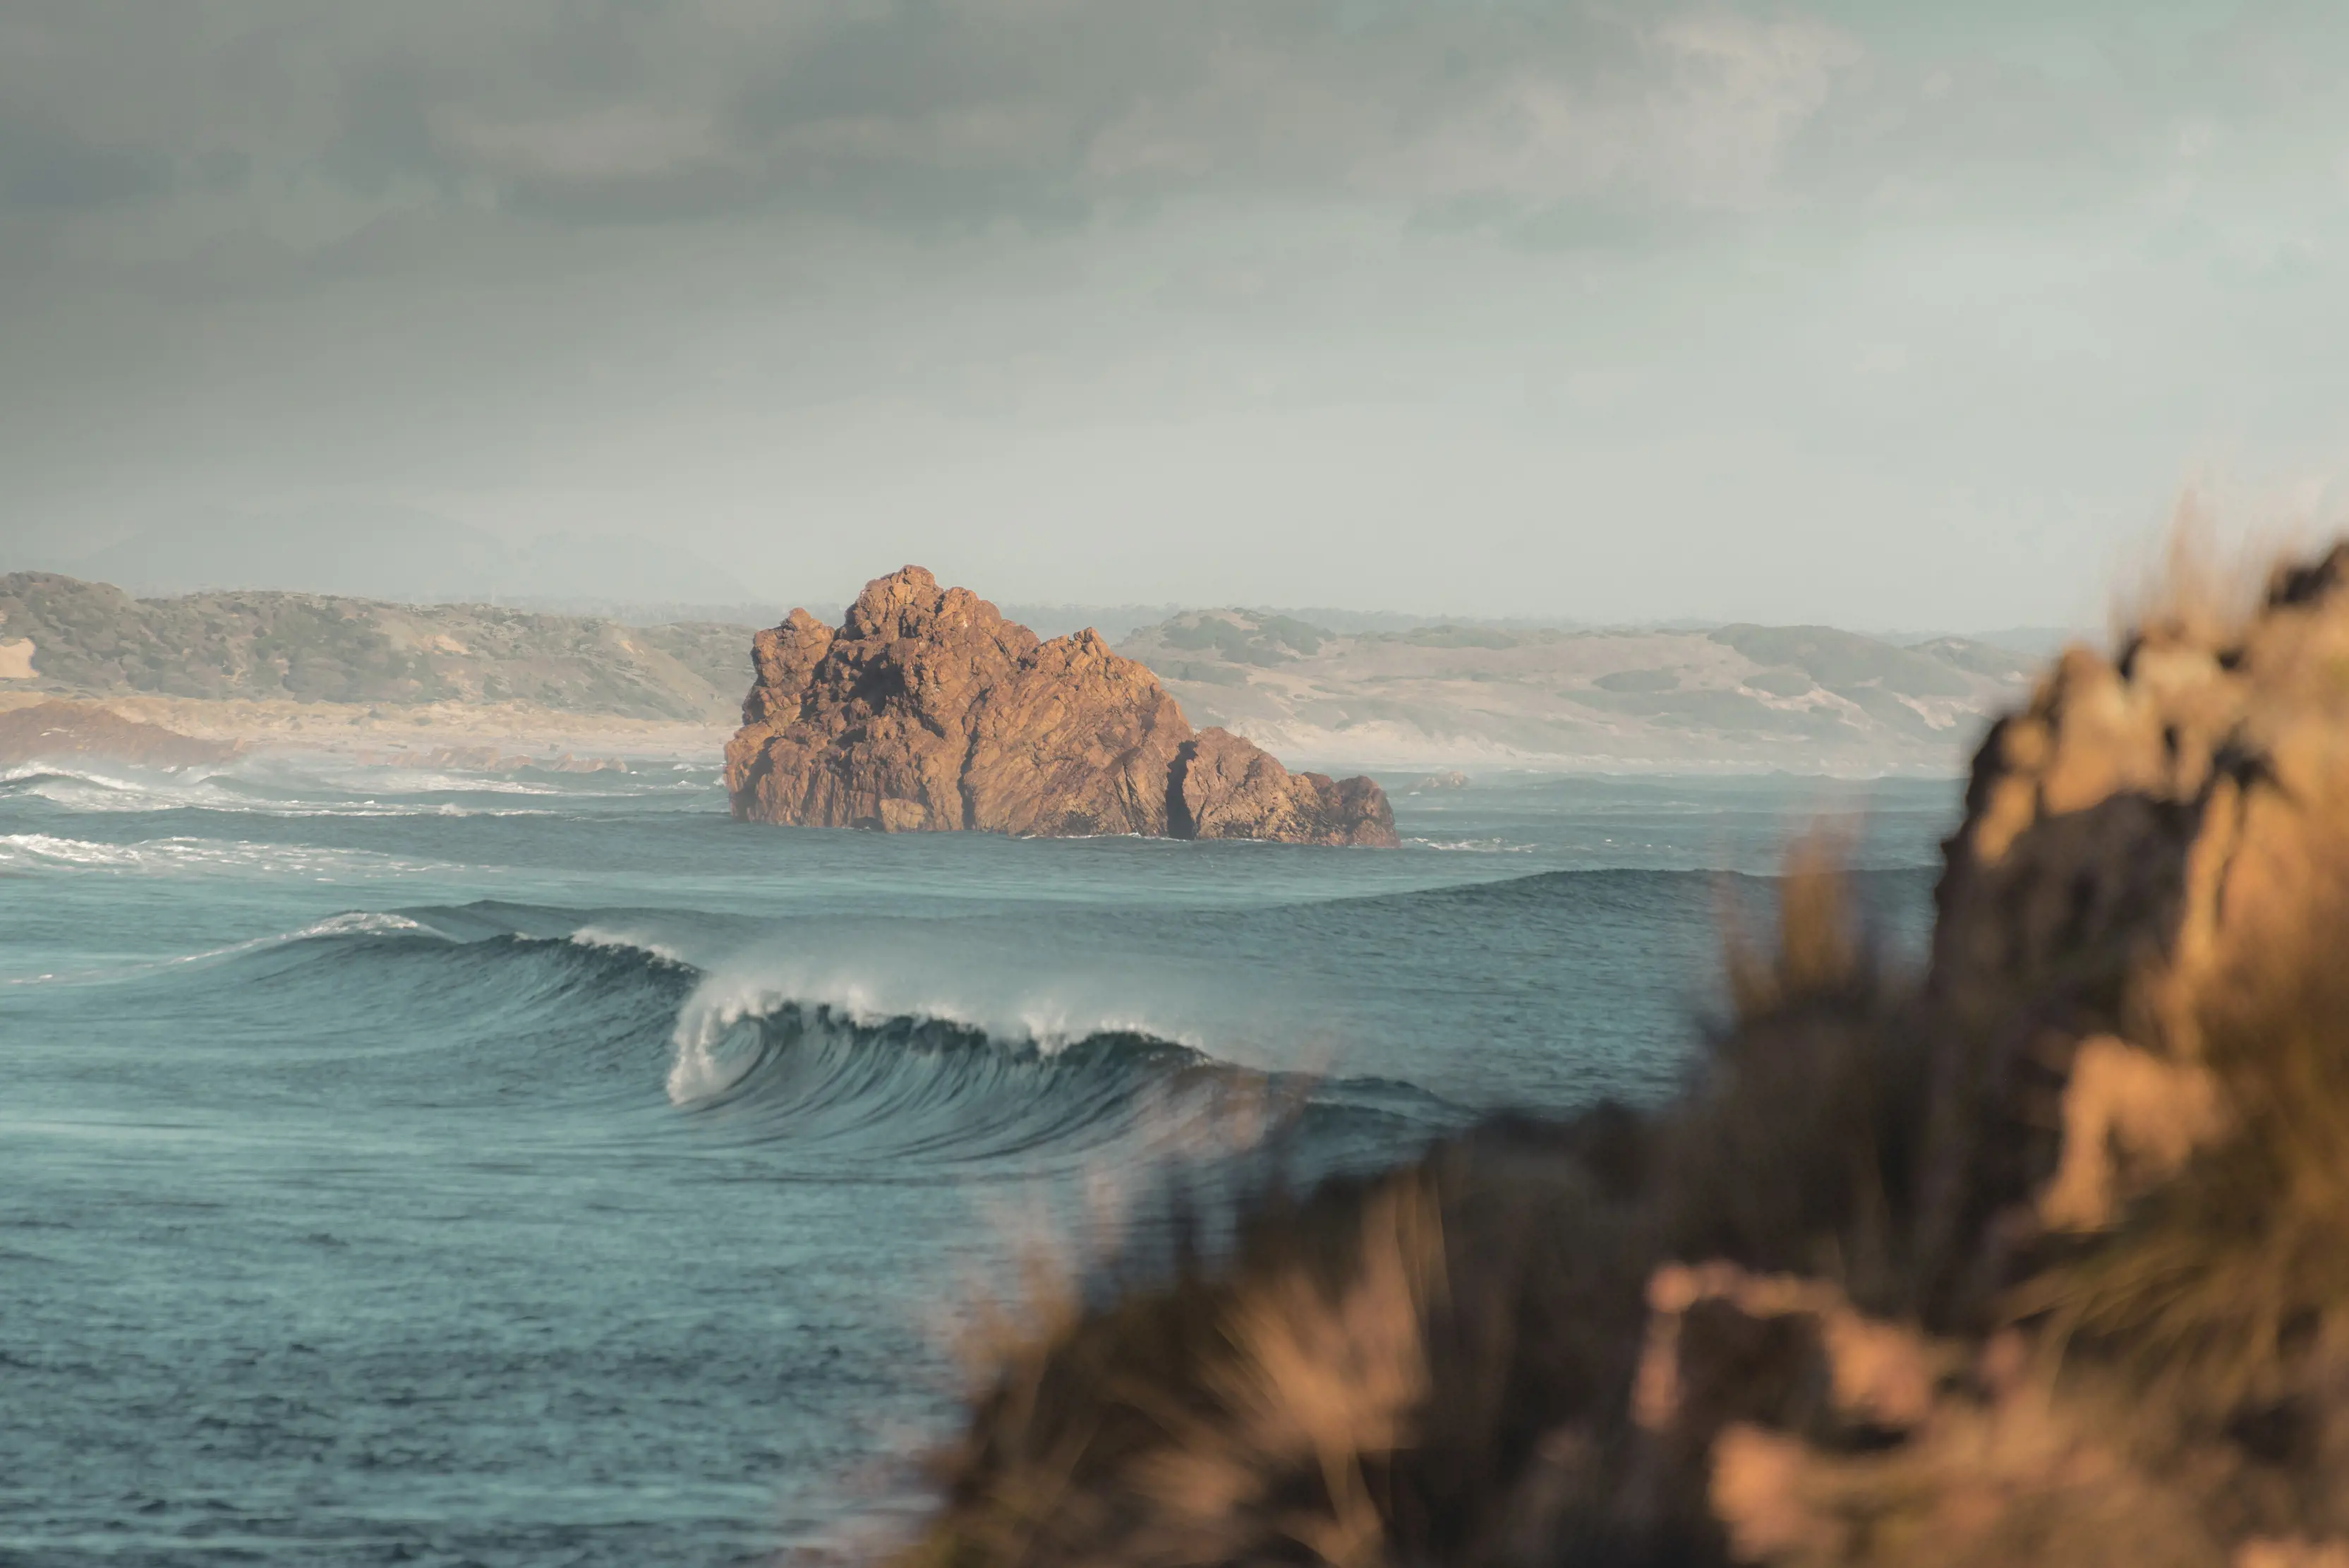 A vibrant image of a breaking wave with surrounding coastline in the background. Taken within the Arthur-Pieman Conservation Area.